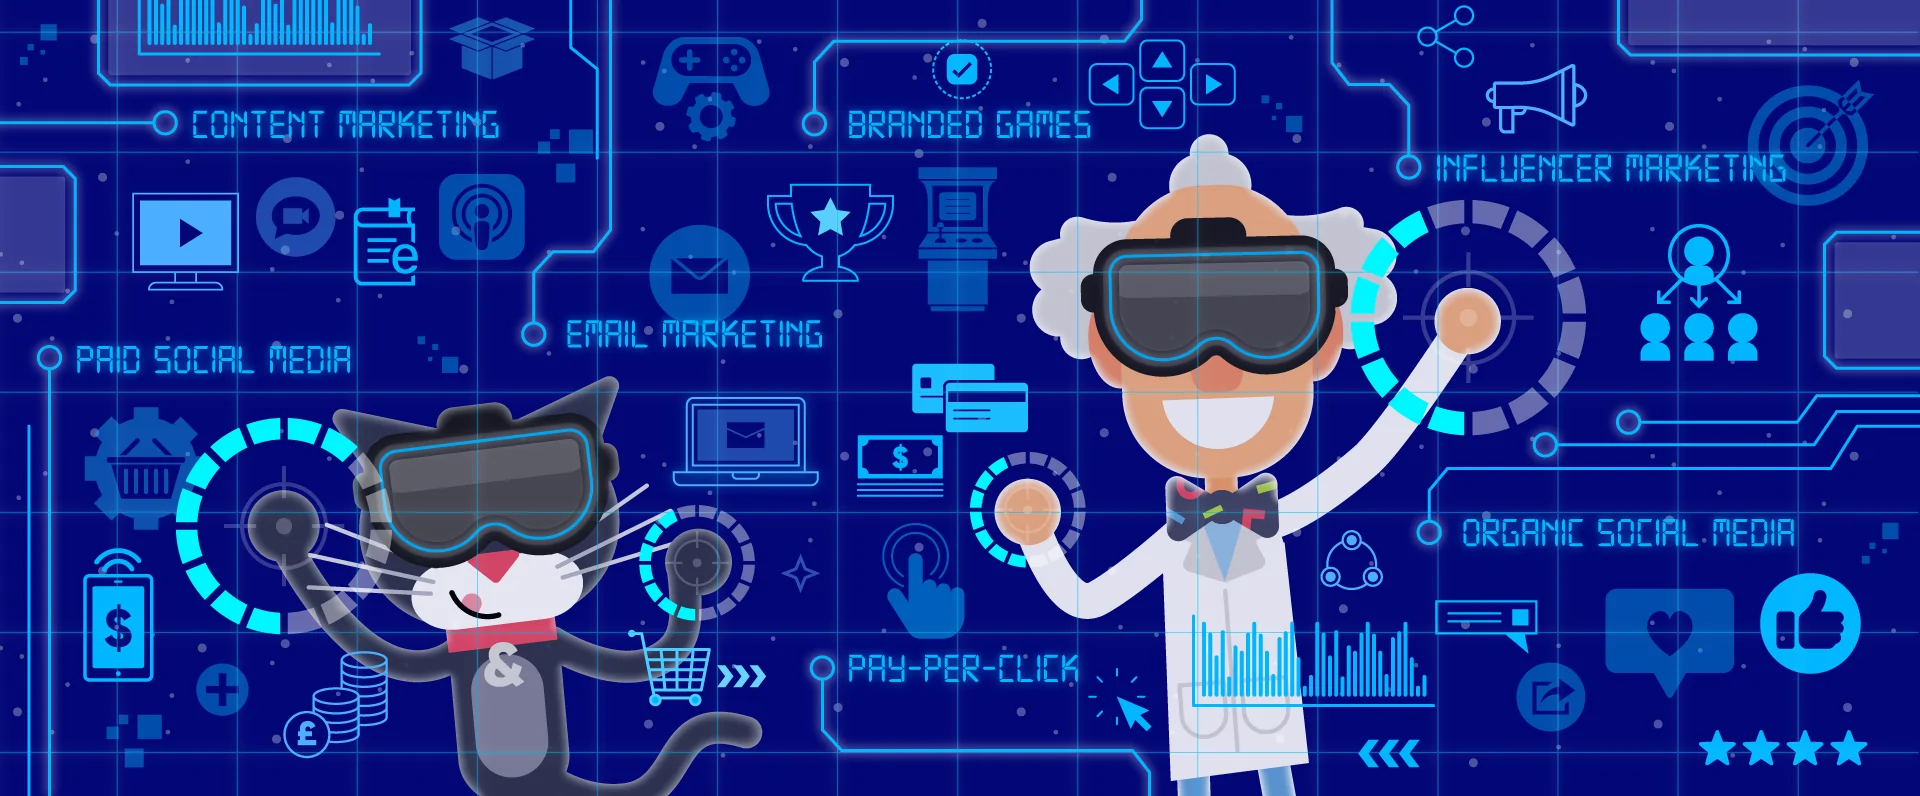 Branded Games Guide: B2B Tech Edition Header Image